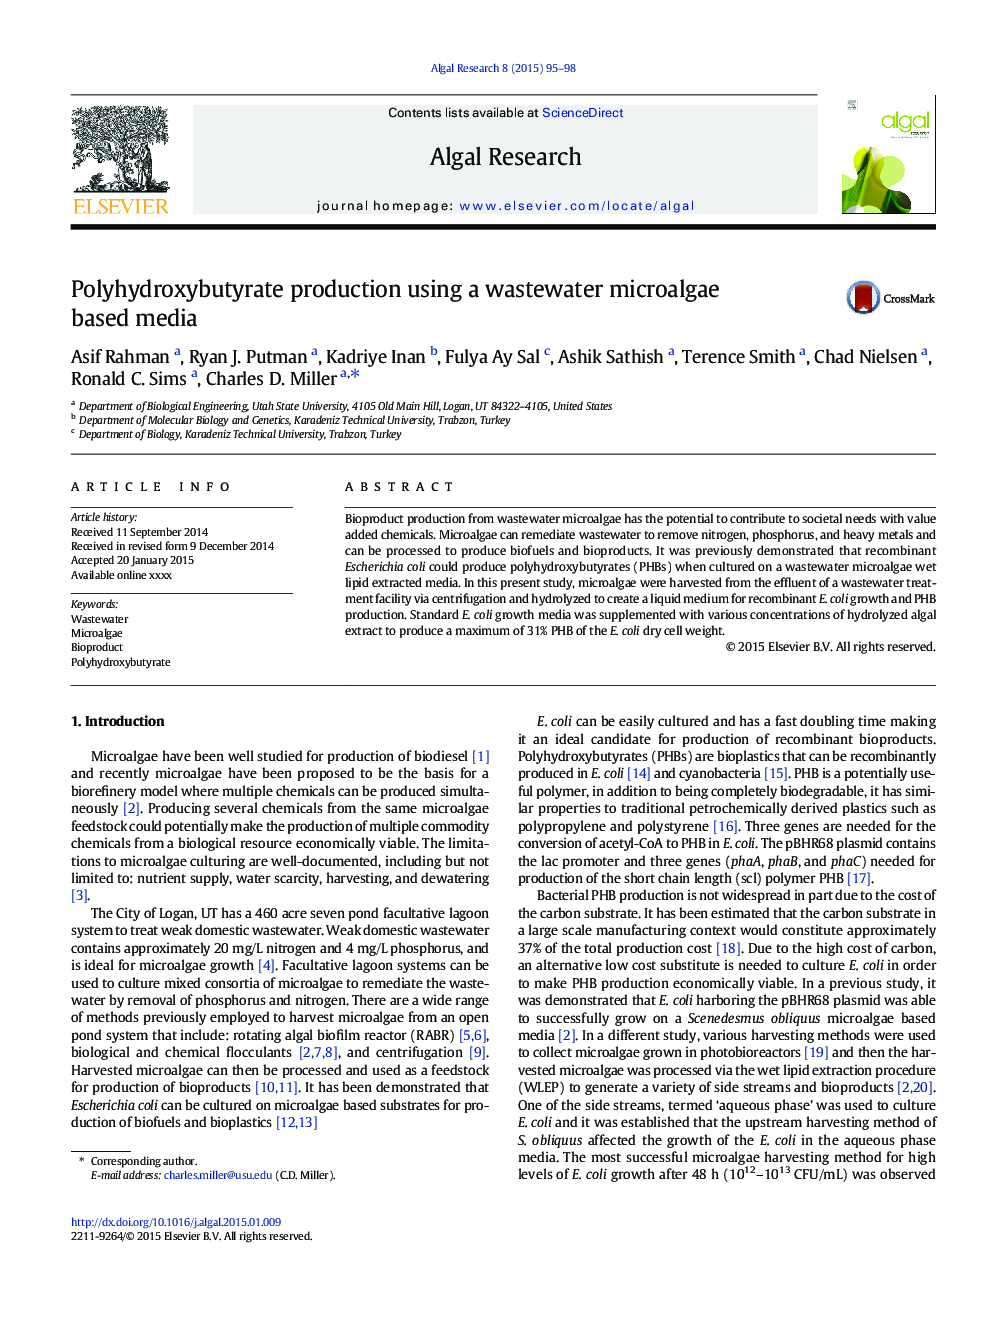 Polyhydroxybutyrate production using a wastewater microalgae based media